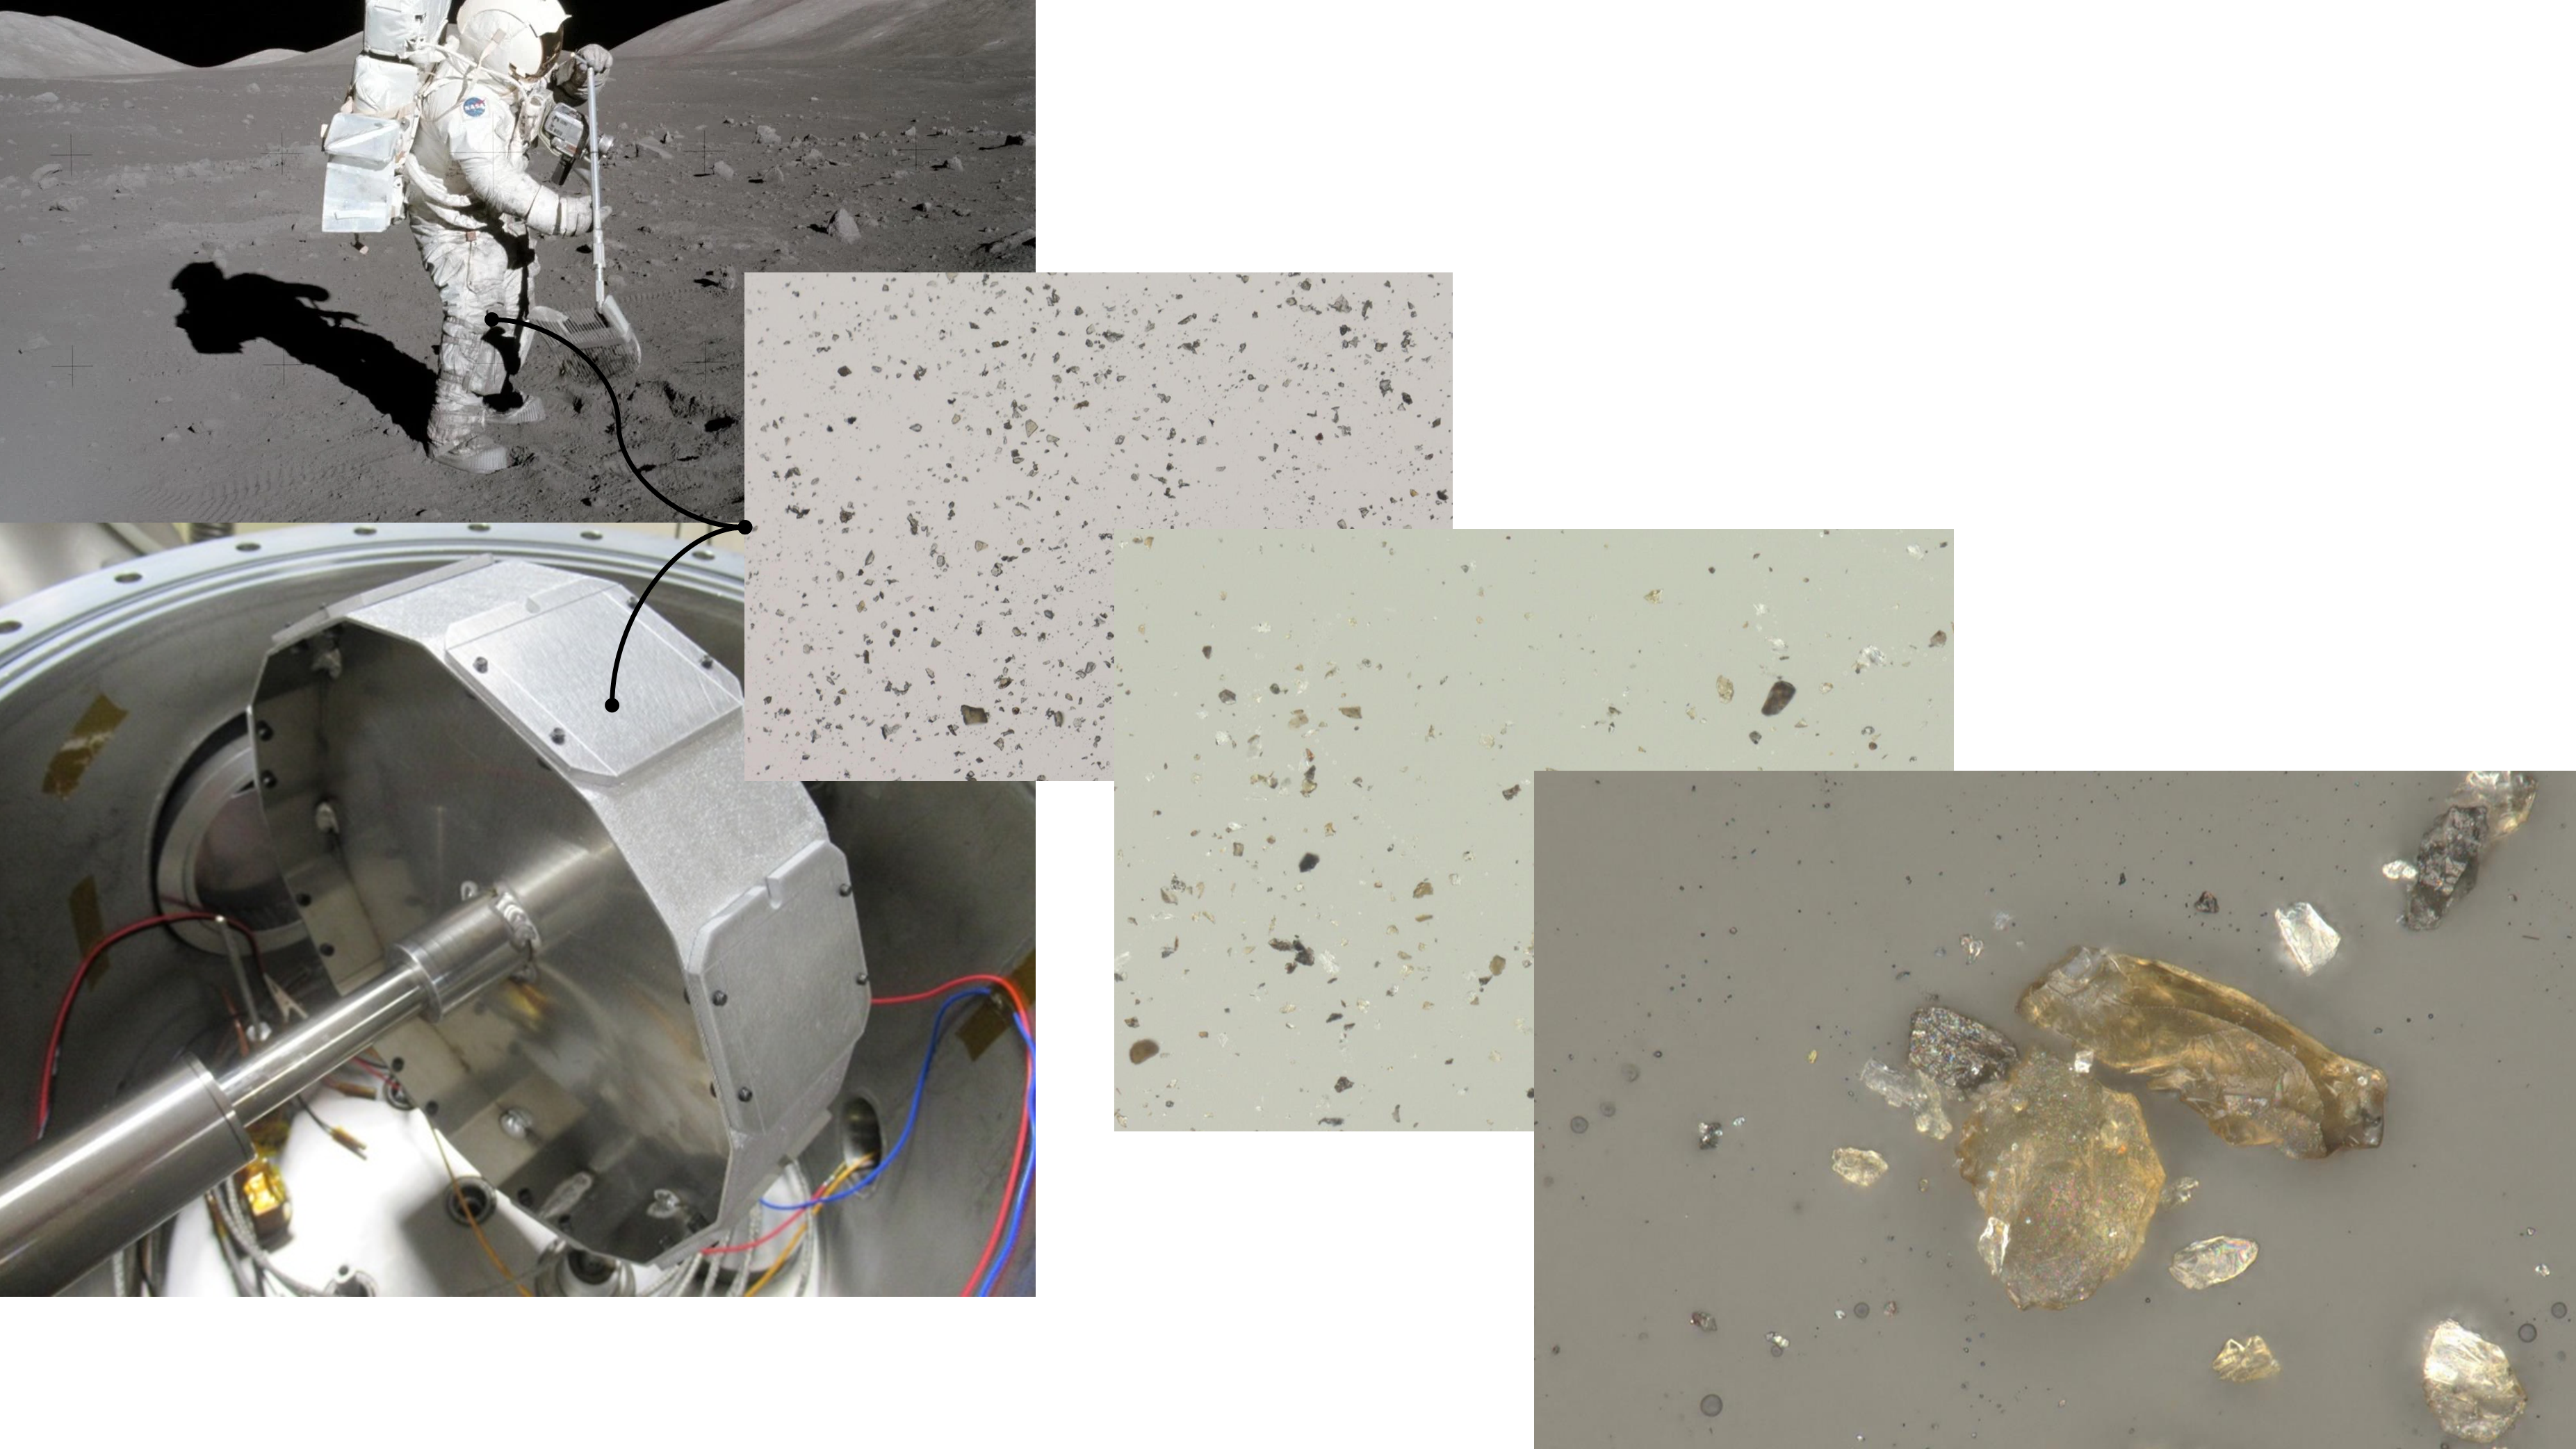 Investigation of Dust adhesion with an Original Combined Experimental Approach (DOCEA) to support planetary, lunar and asteroid missions